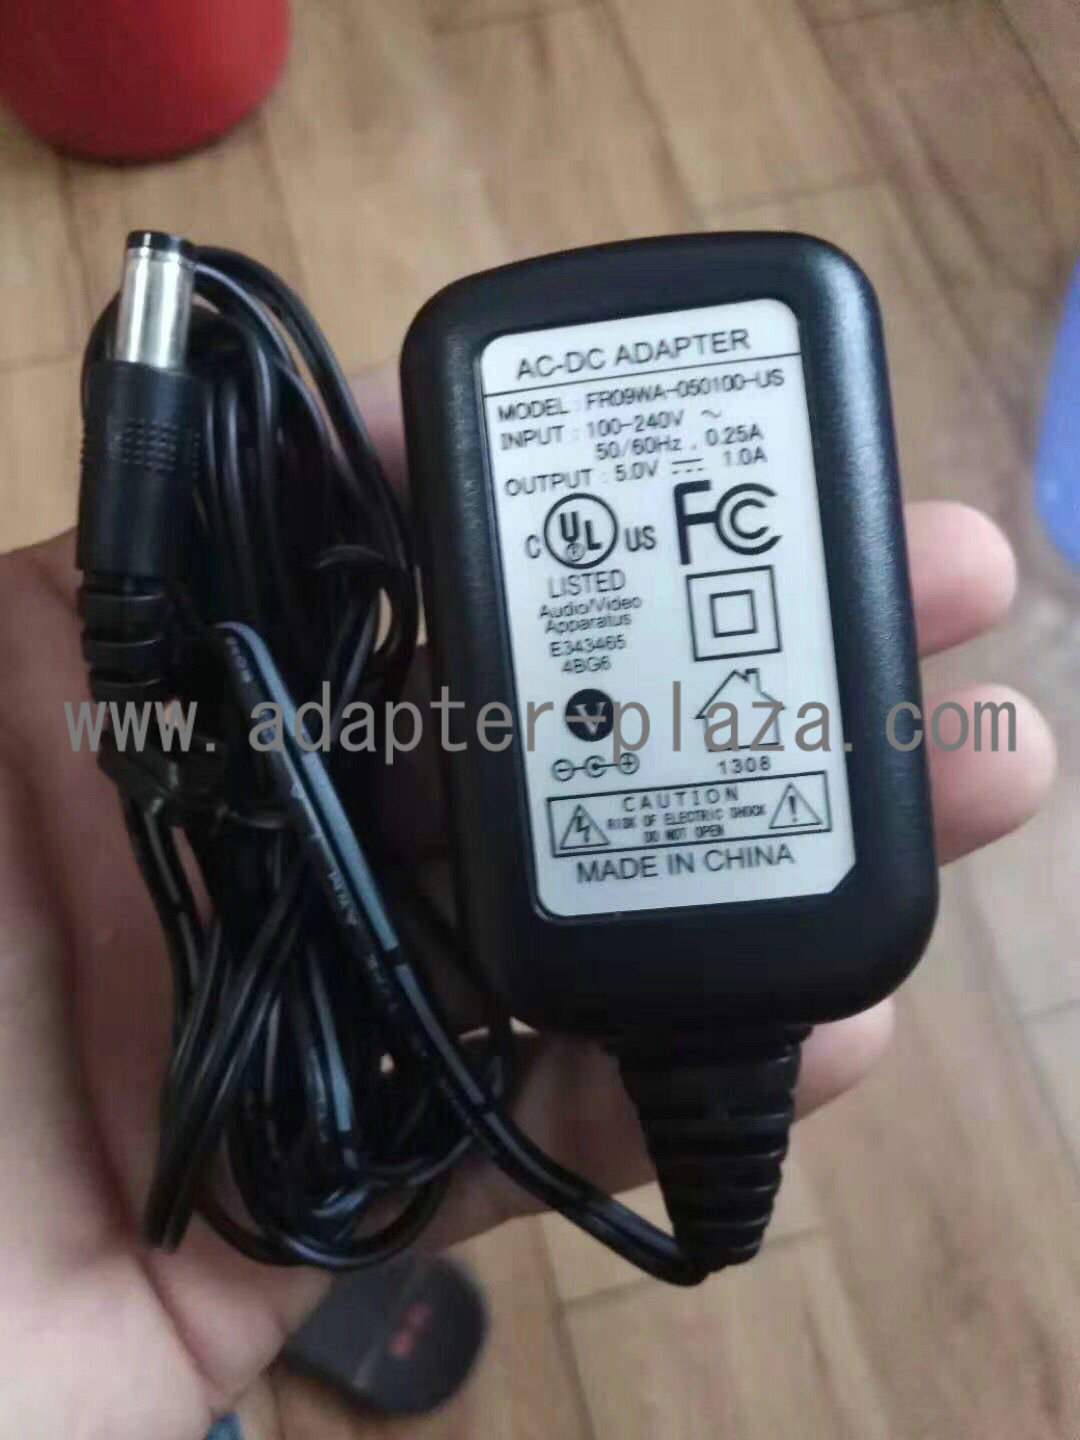 *Brand NEW* FR09WA-050100-US 5.0V 1.0A AC DC Adapter POWER SUPPLY